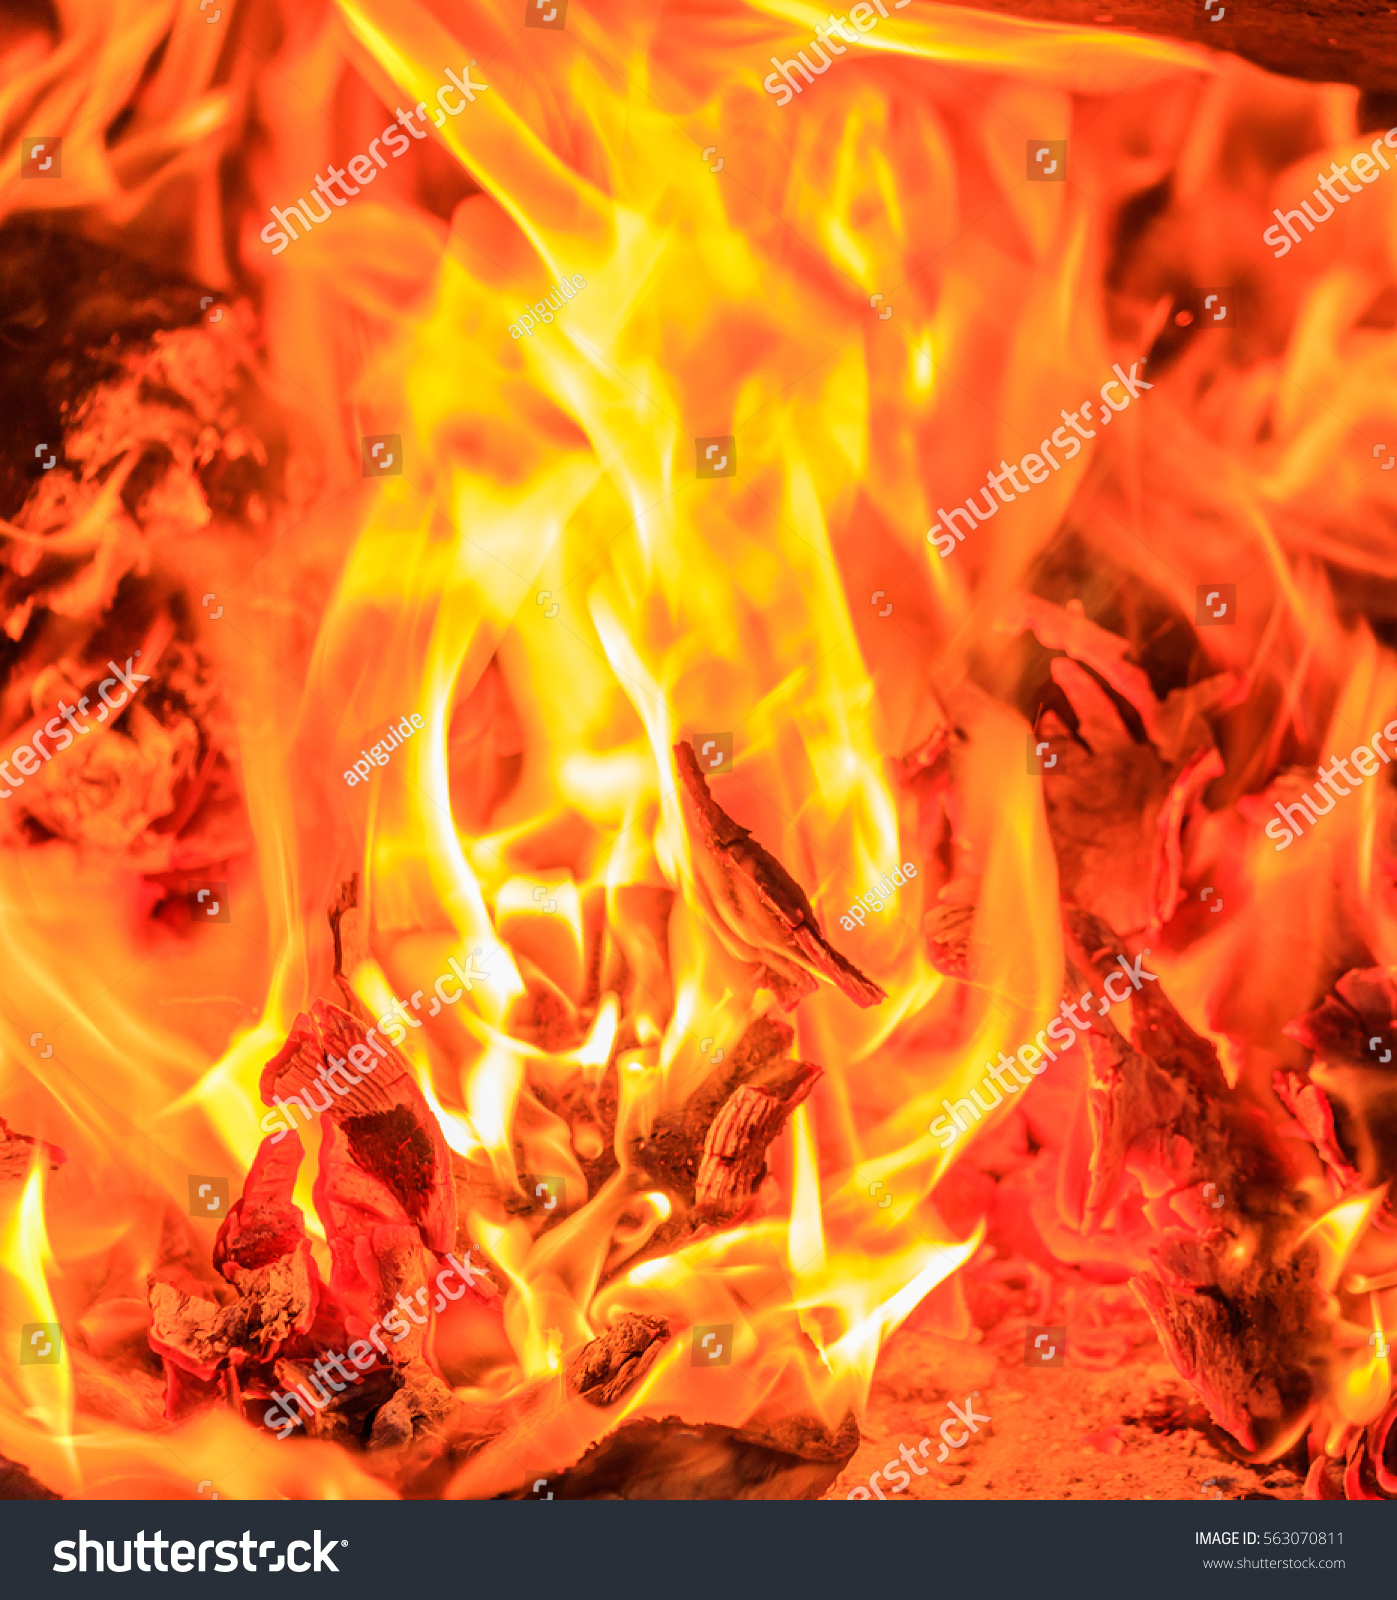 Fire Flames Background Stock Photo (Royalty Free) 563070811 ...